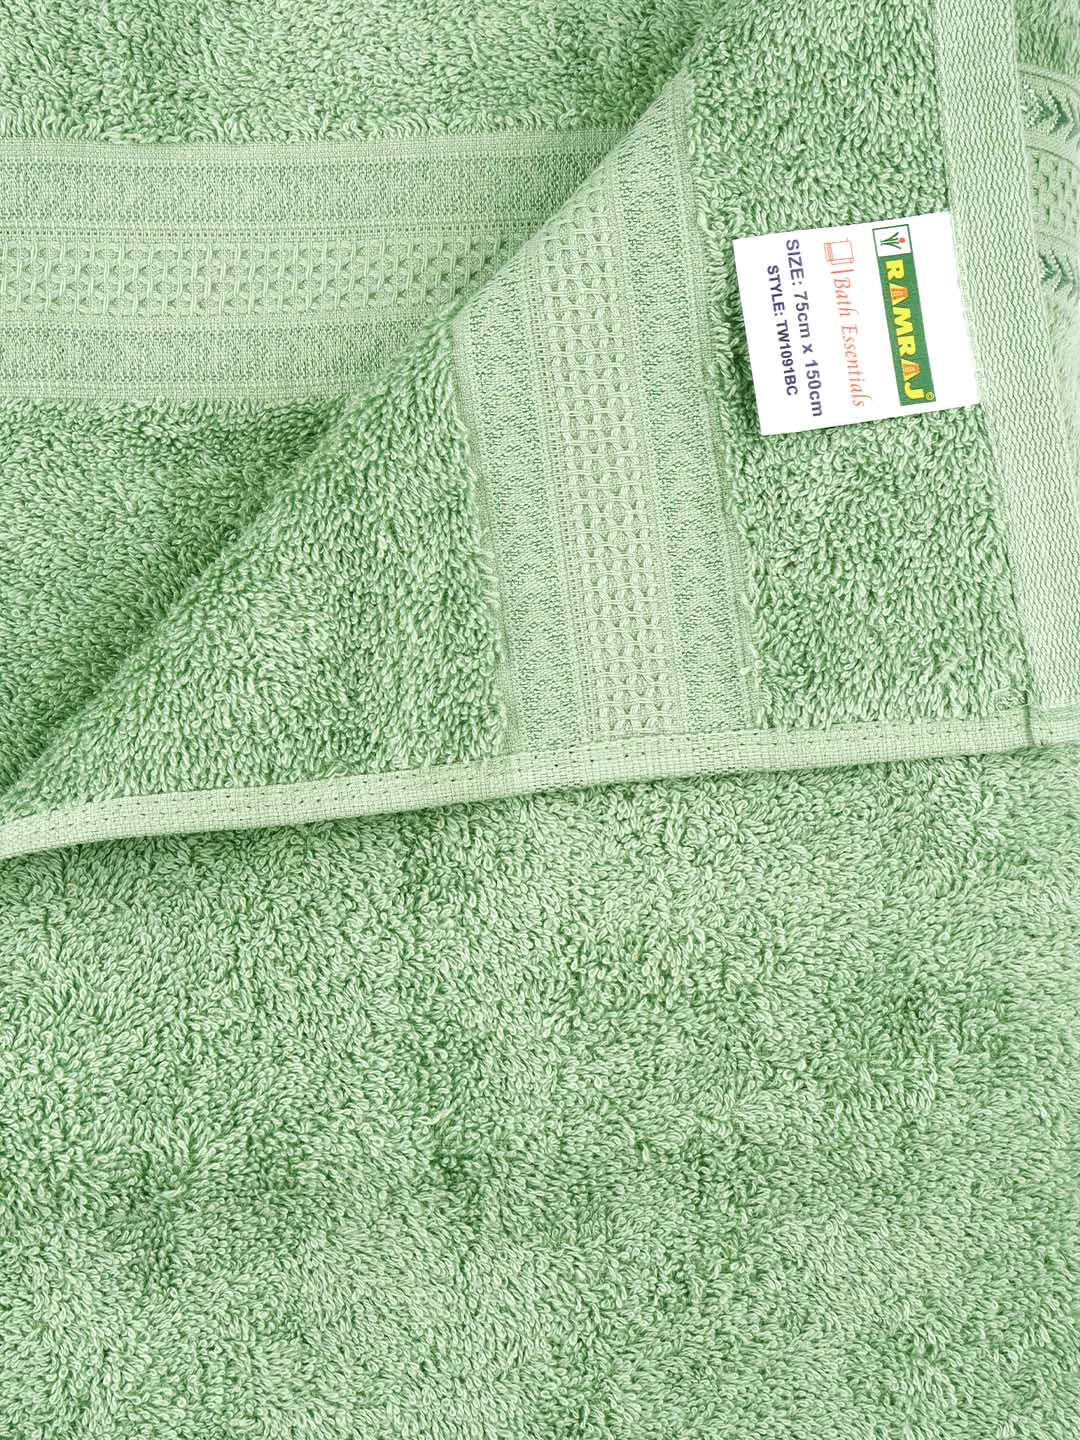 Premium Soft & Absorbent Cotton Bamboo Light Green Terry Bath Towel BC2-View one